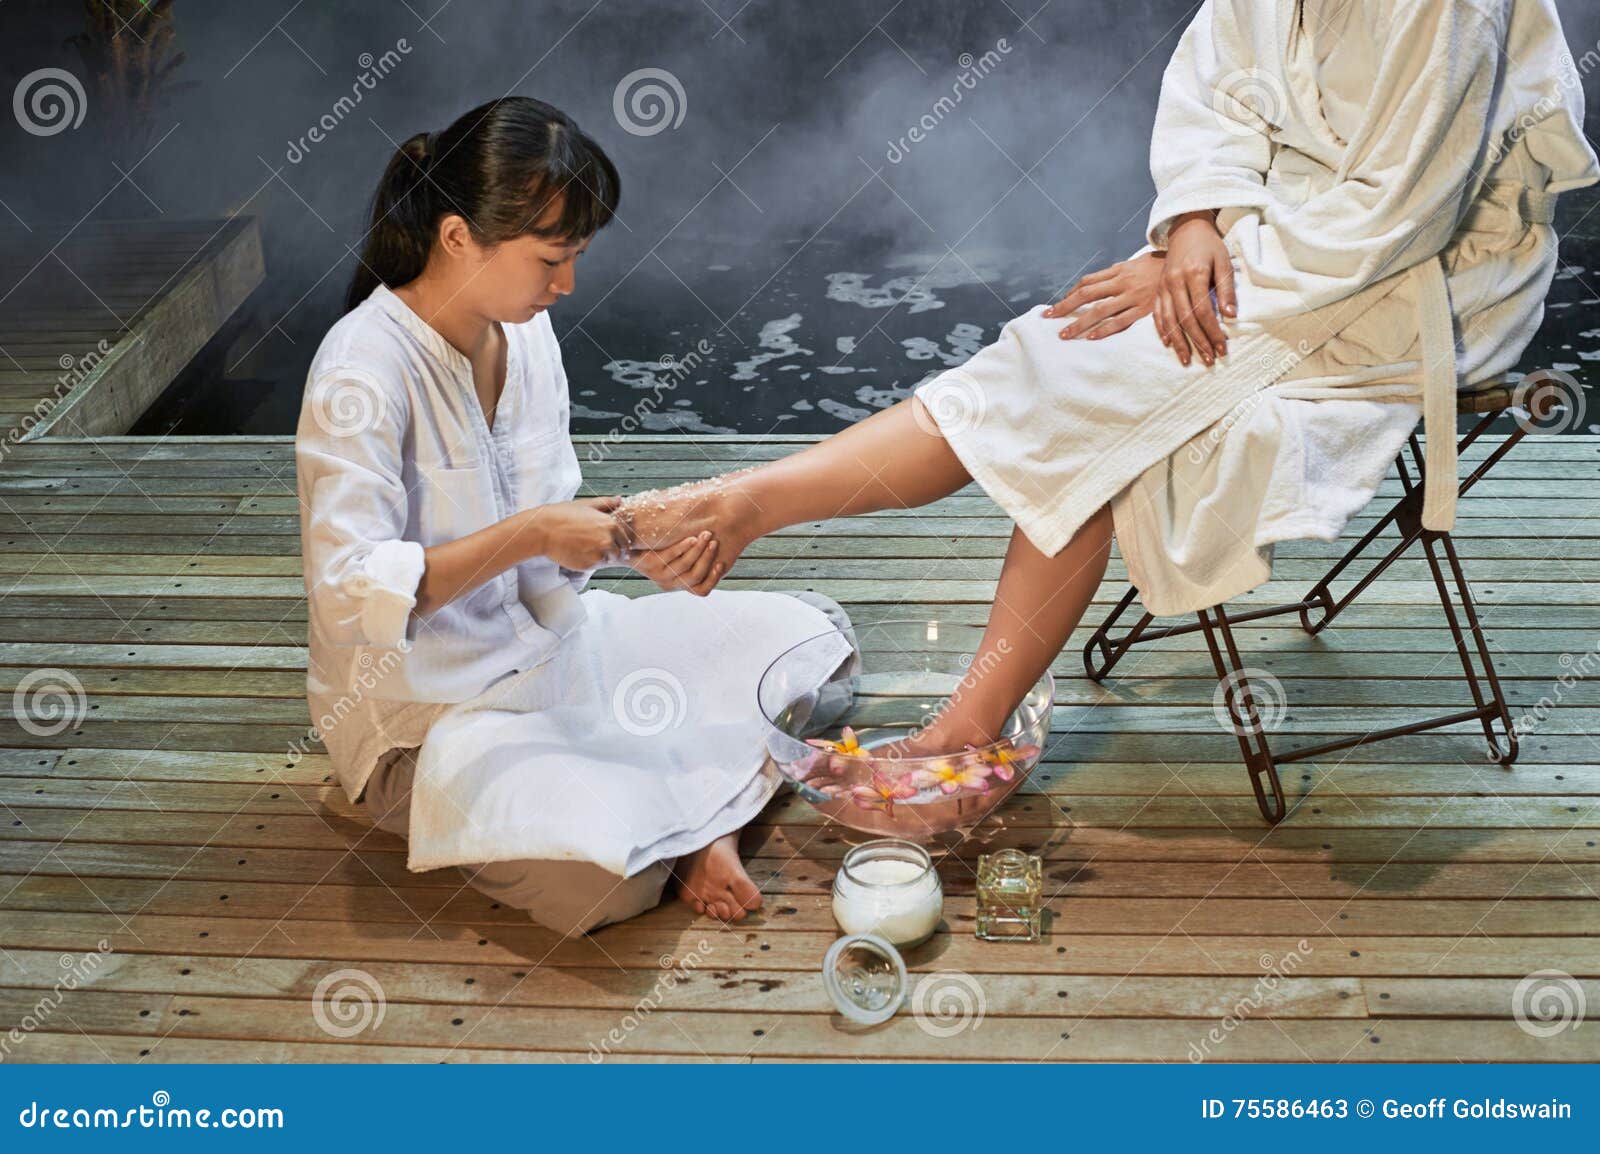 Asian Foot Massage Therapy Spa Hot Stone Stock Image Image Of